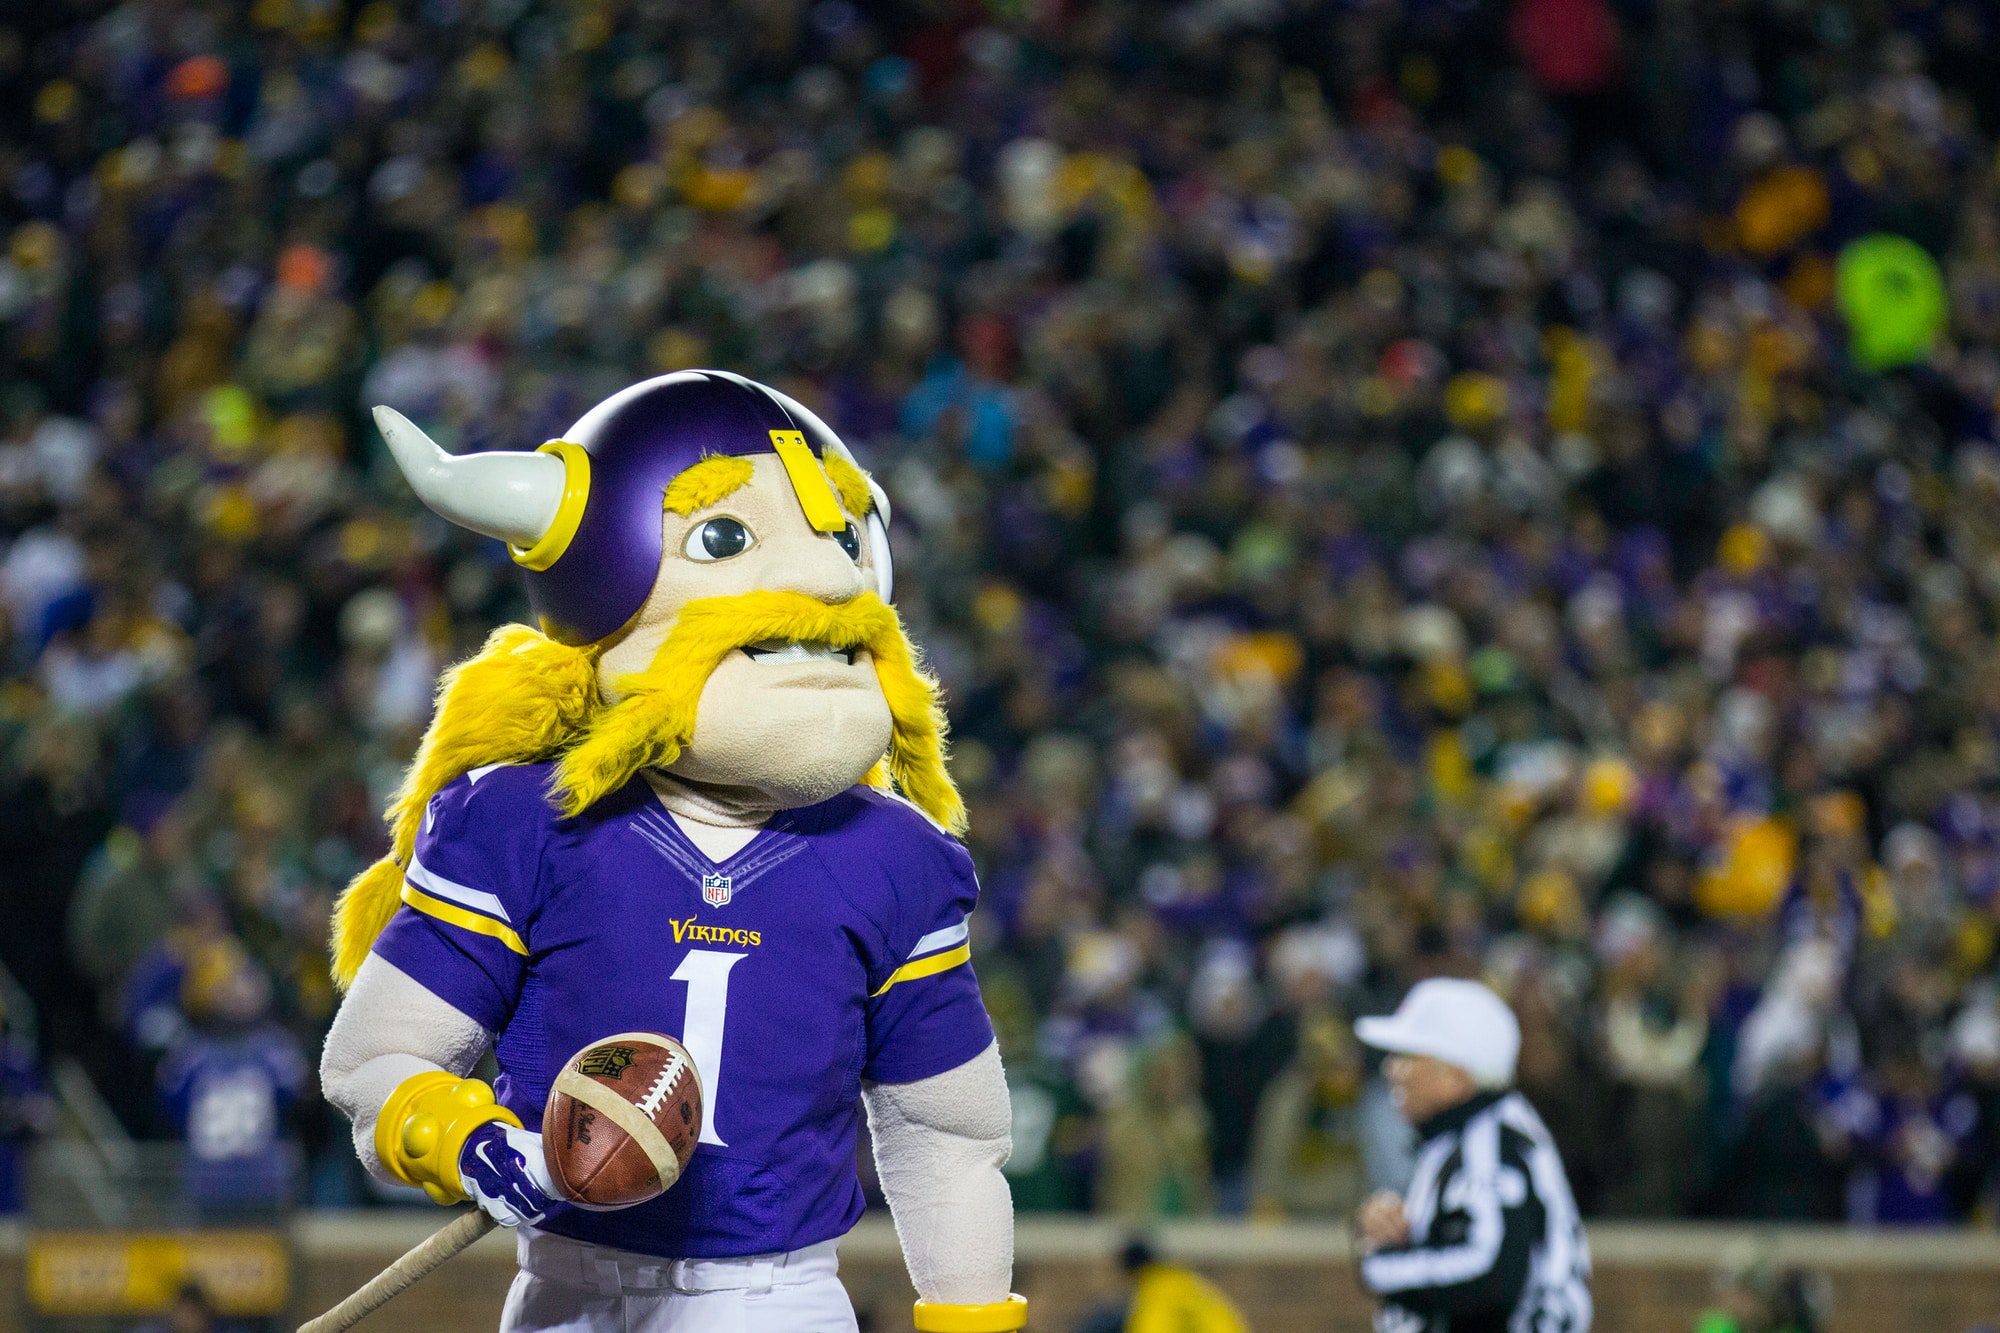 Monday Night Football: Vikings vs Bears Week 15 Odds and Preview